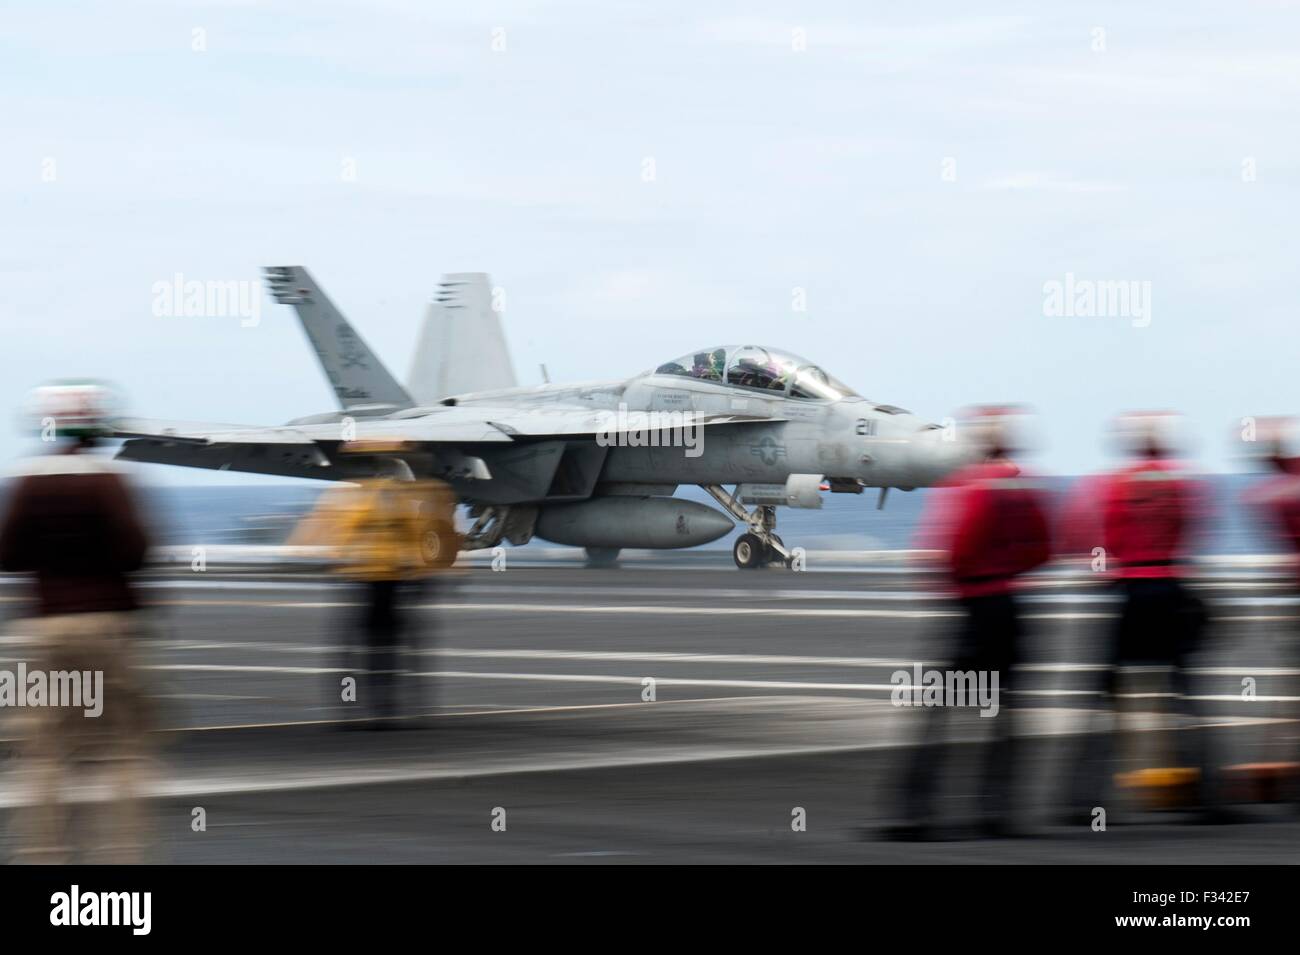 A US Navy F/A-18F Super Hornet fighter aircraft launches from the flight deck of the aircraft carrier USS Harry S. Truman September 15, 2015 operating in the Atlantic Ocean. Stock Photo